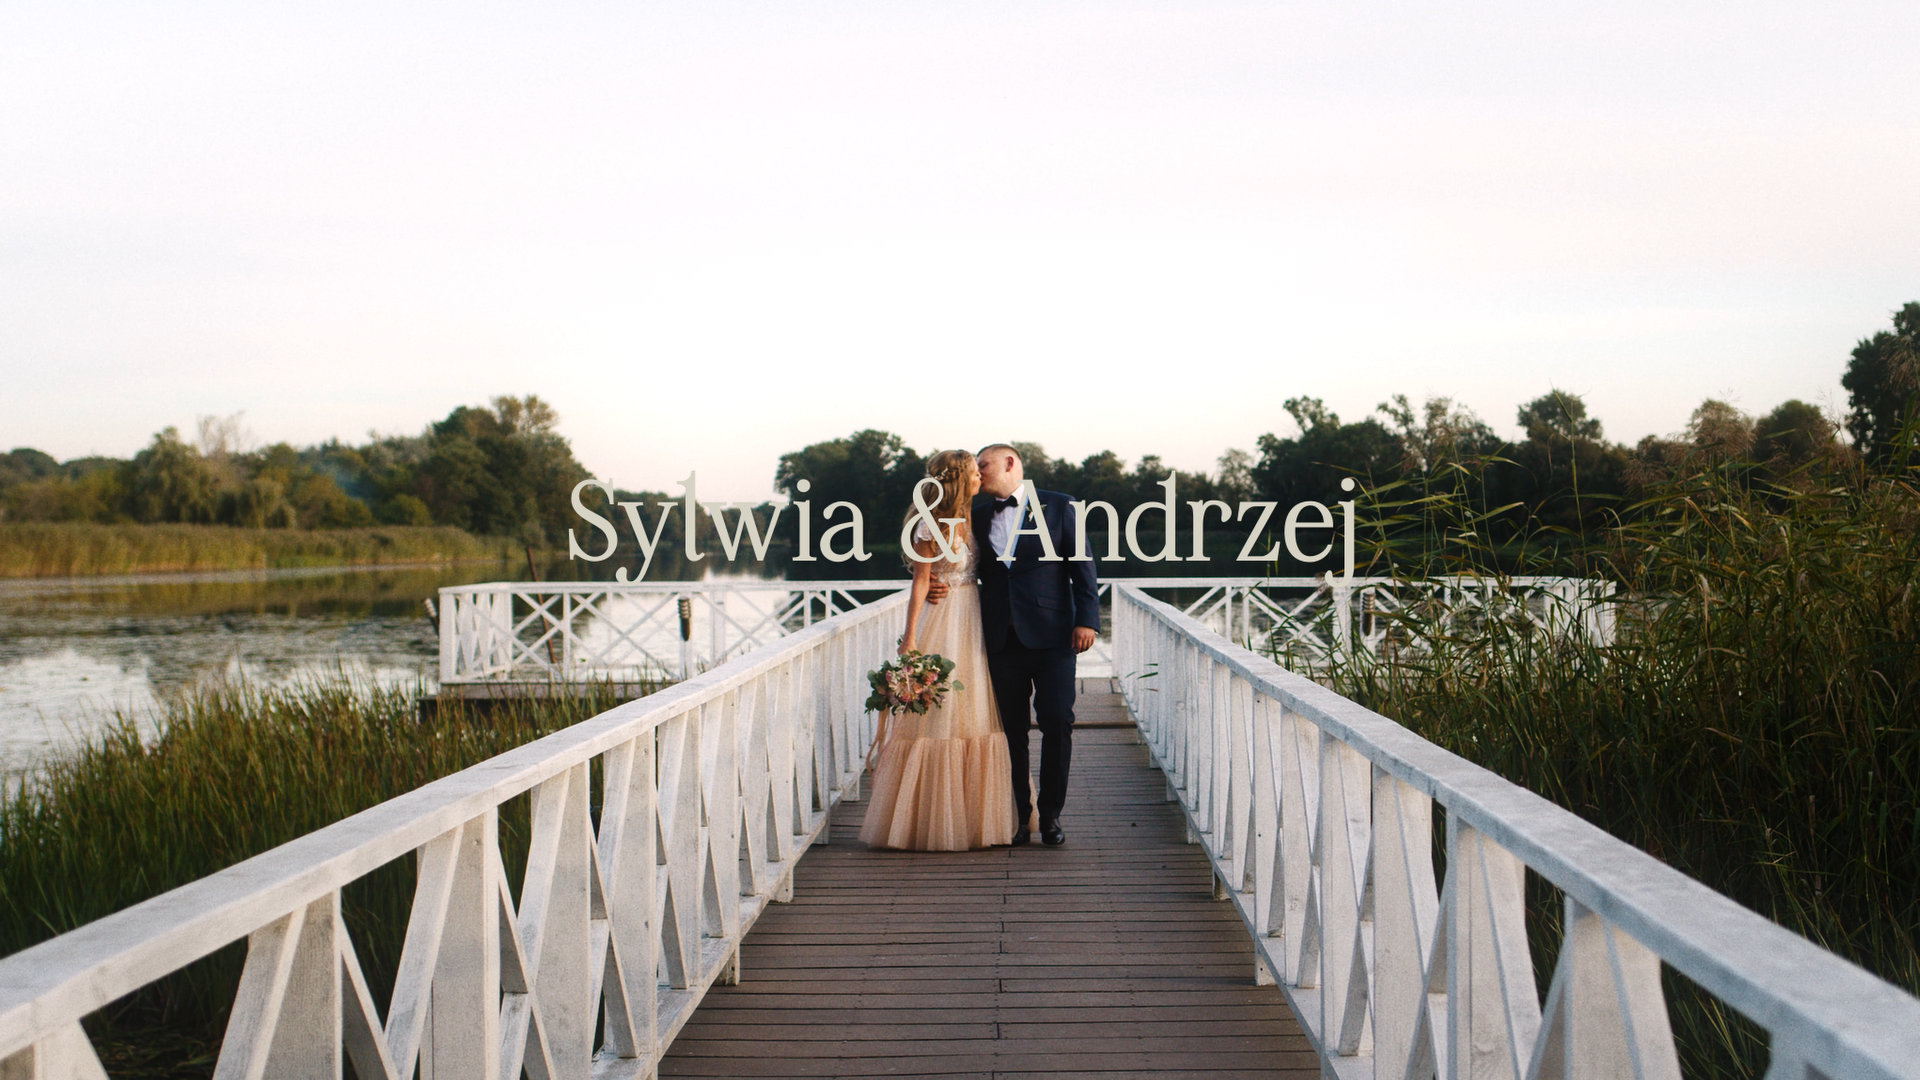 Image of Sylwia and Andrzej